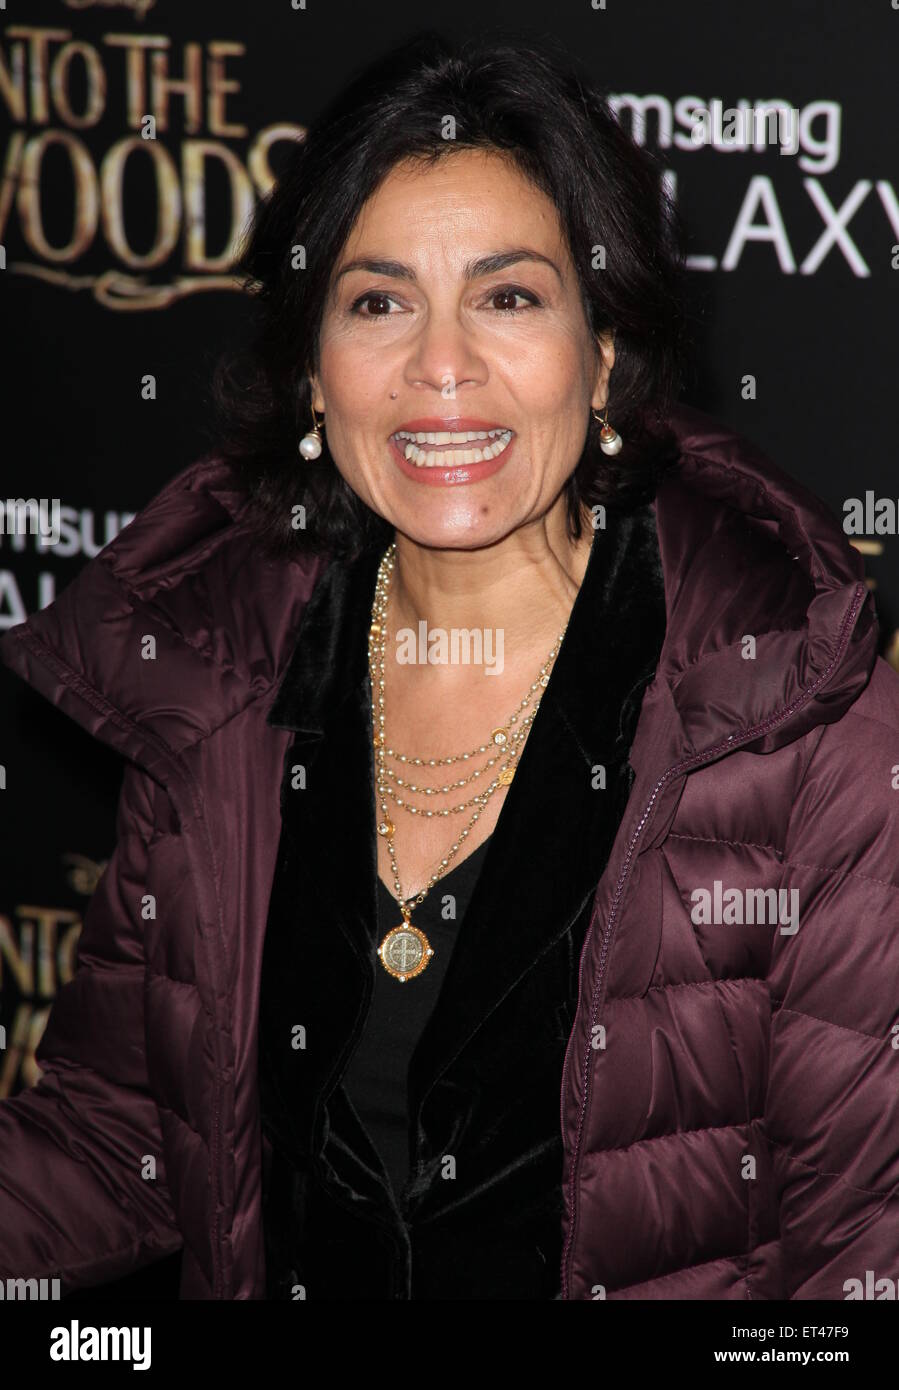 'Into The Woods' New York premiere held at the Ziegfeld Theater - Arrivals  Featuring: Rachel Ticotin Where: New York, United States When: 09 Dec 2014 Credit: PNP/WENN.com Stock Photo